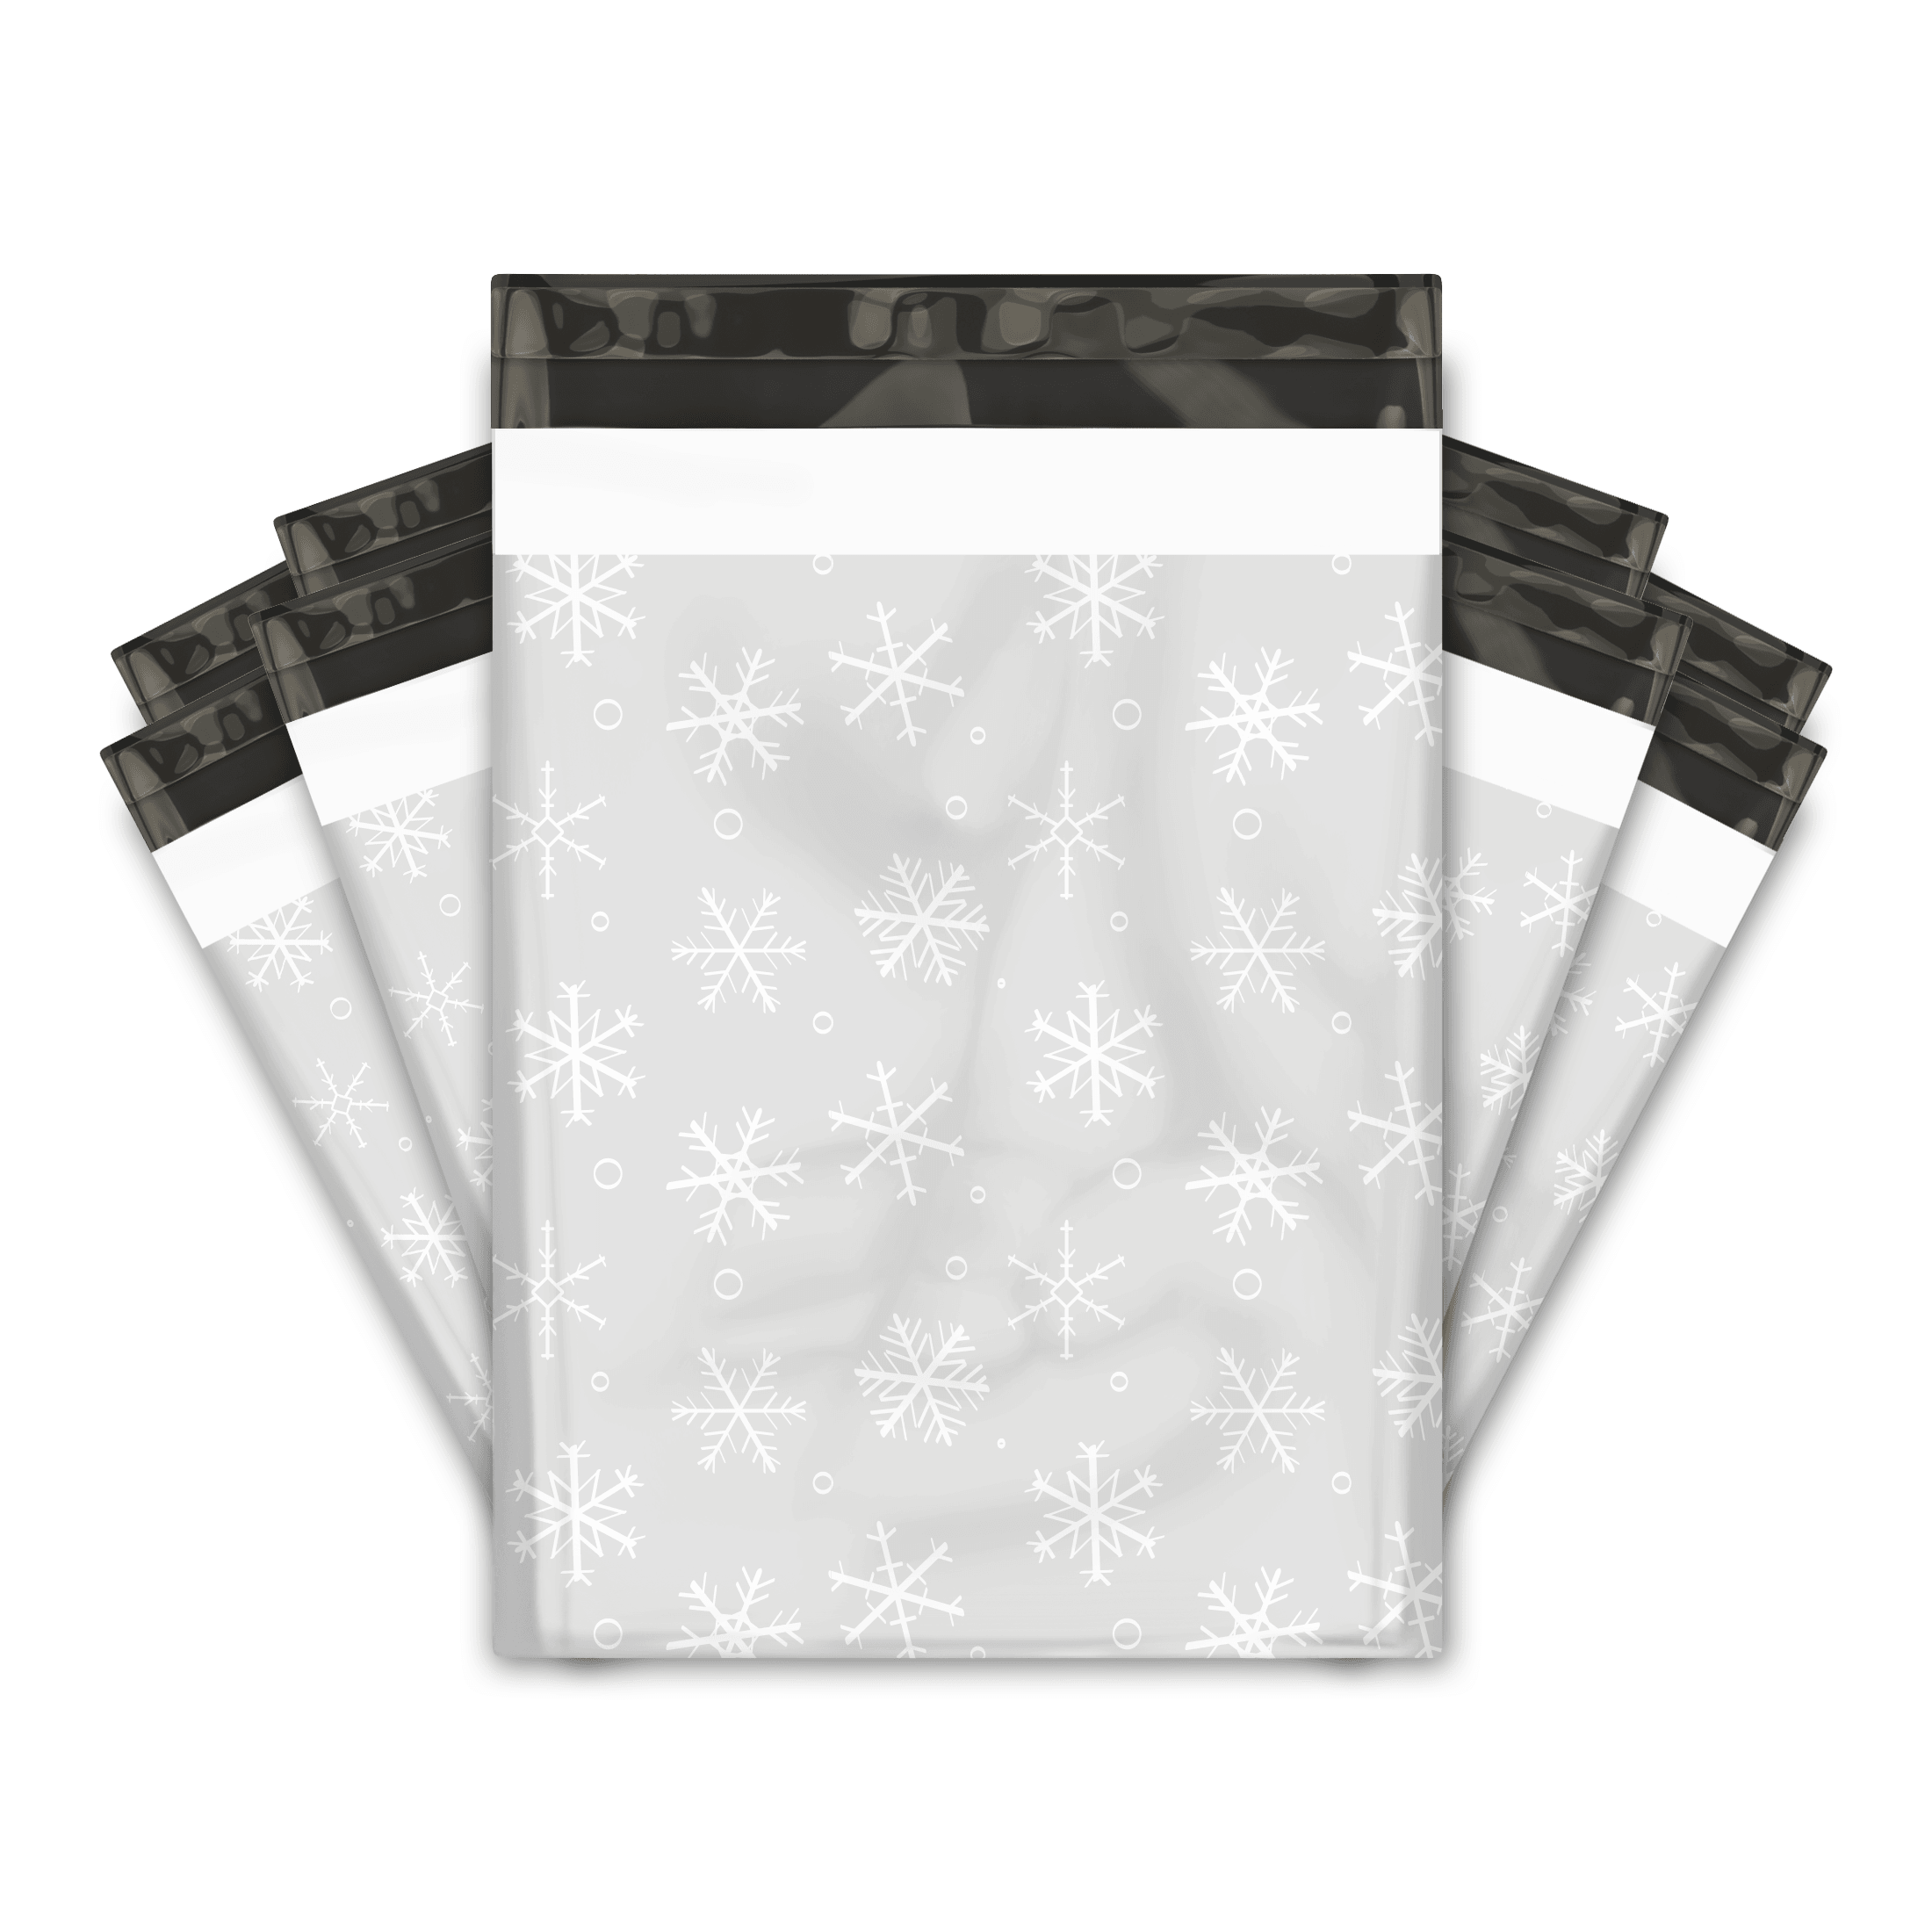  Winter Snowflakes Designer Poly Mailers Shipping Envelopes Premium Printed Bags